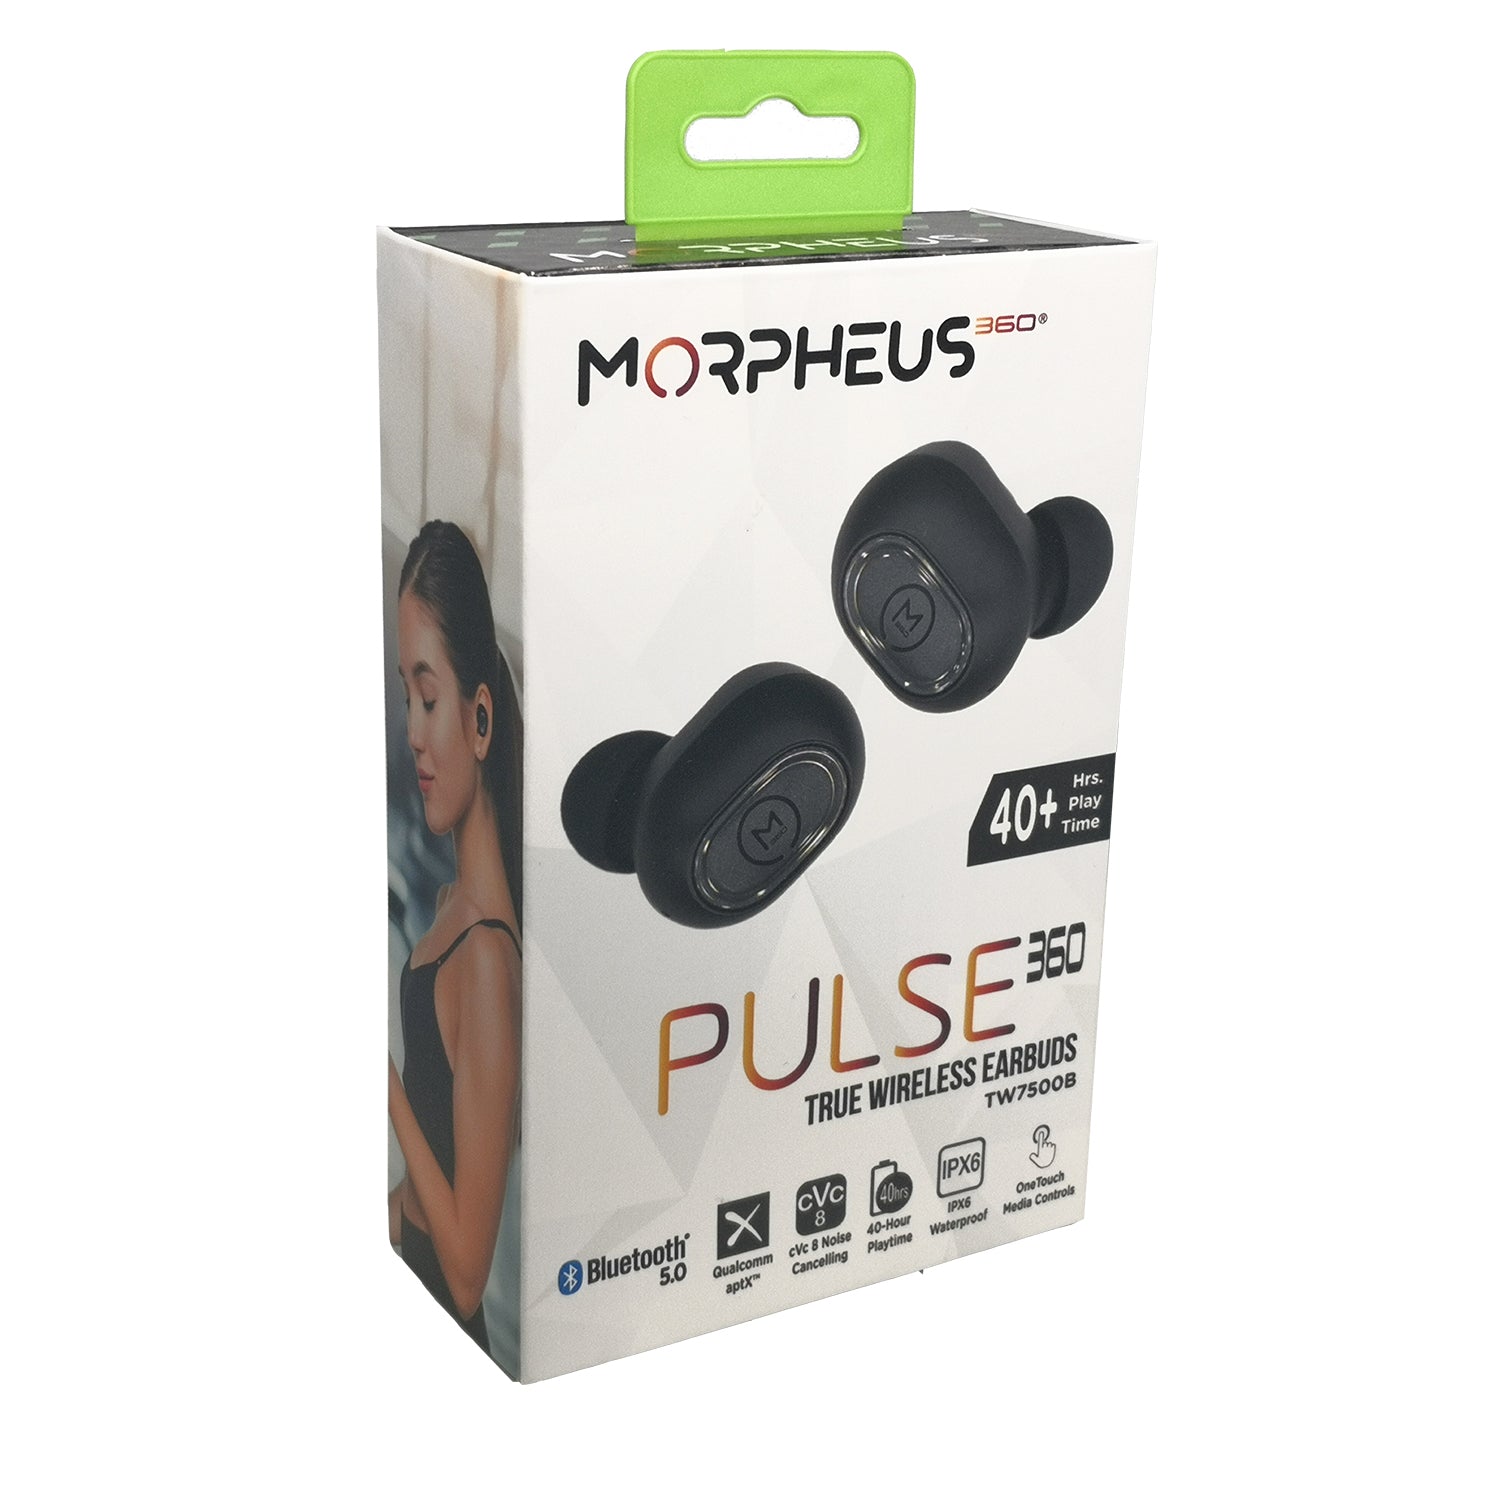  Morpheus 360 Pulse HD Wireless Earbuds, Hybrid Noise  Cancelling, Wireless Microphone, Bluetooth 5.2 Wireless Ear Buds, One Touch  Media Control, Waterproof, Recharging Earbud Case - TW7800W, White : Home &  Kitchen